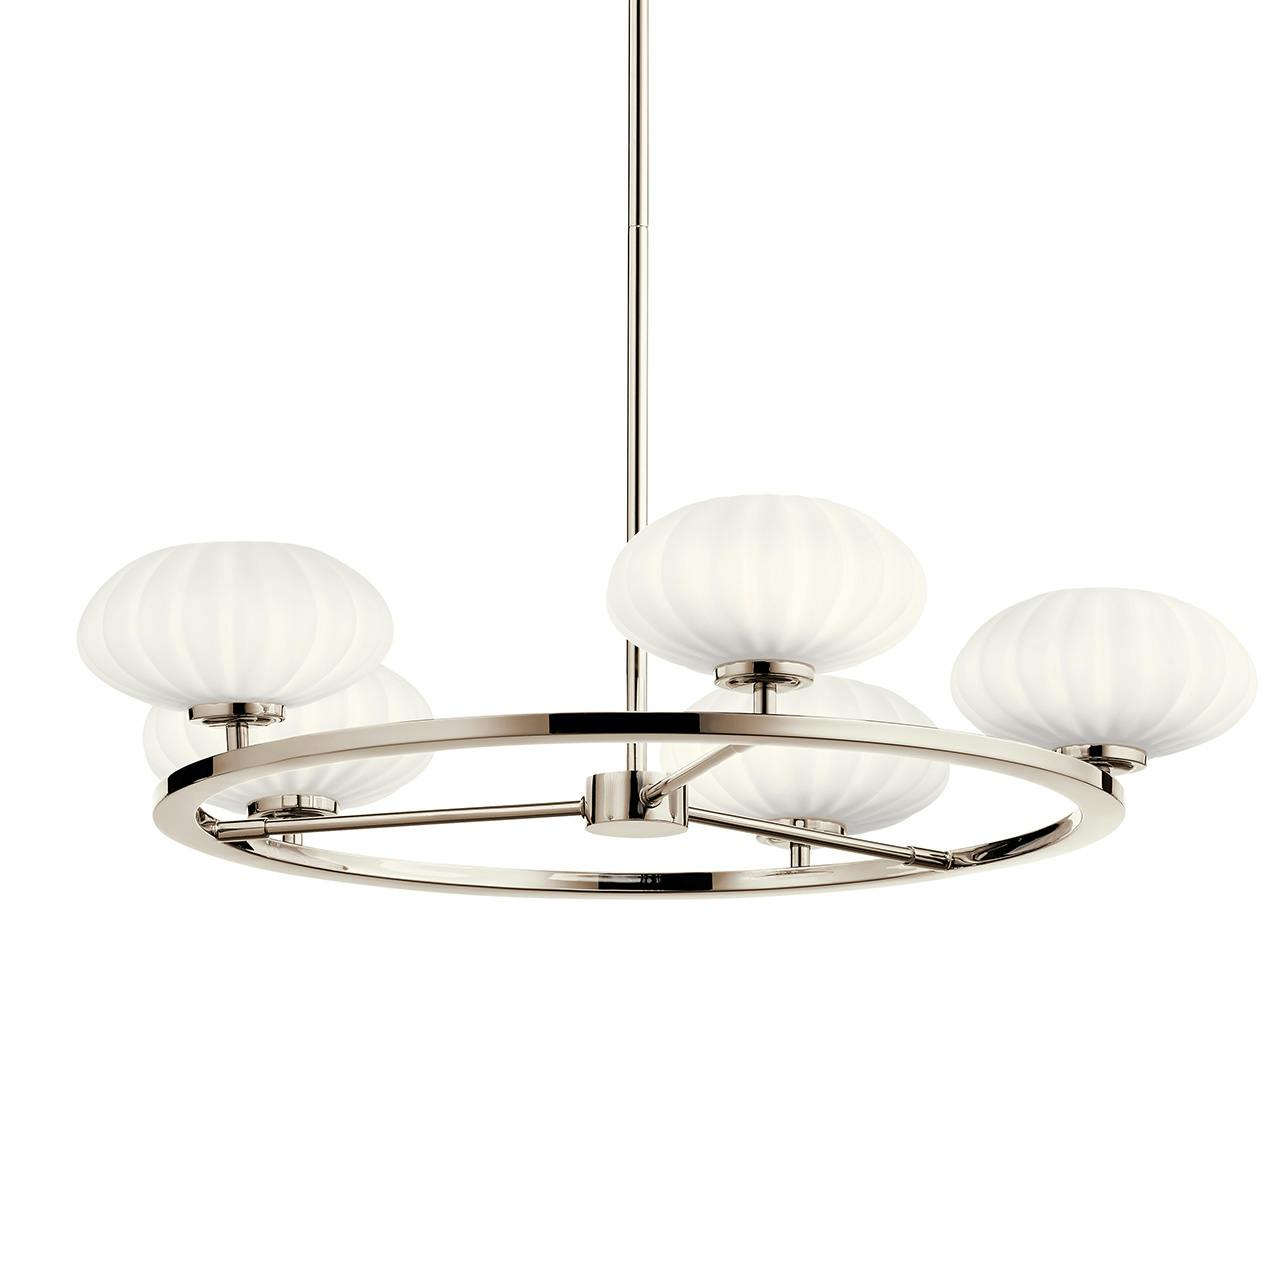 Pim 40" 5 Light Round Chandelier Nickel without the canopy on a white background